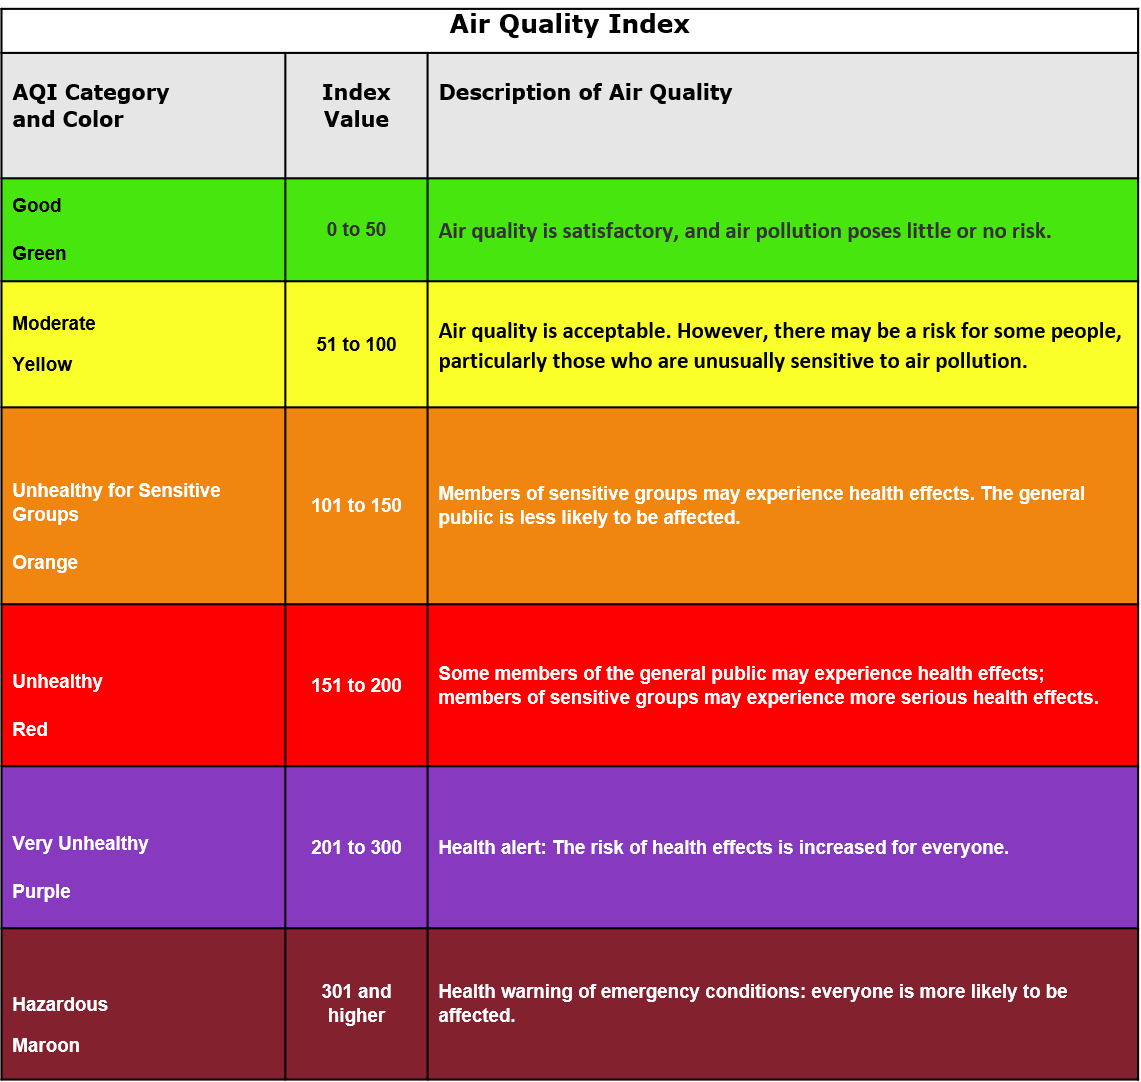 Table shows six categories and corresponding colors for the Air Quality Index plus descriptions of air quality. Green (good), Moderate (yellow), Unhealthy for Sensitive Groups (orange), Unhealthy (red), Very Unhealthy (purple) and Hazardous (maroon).